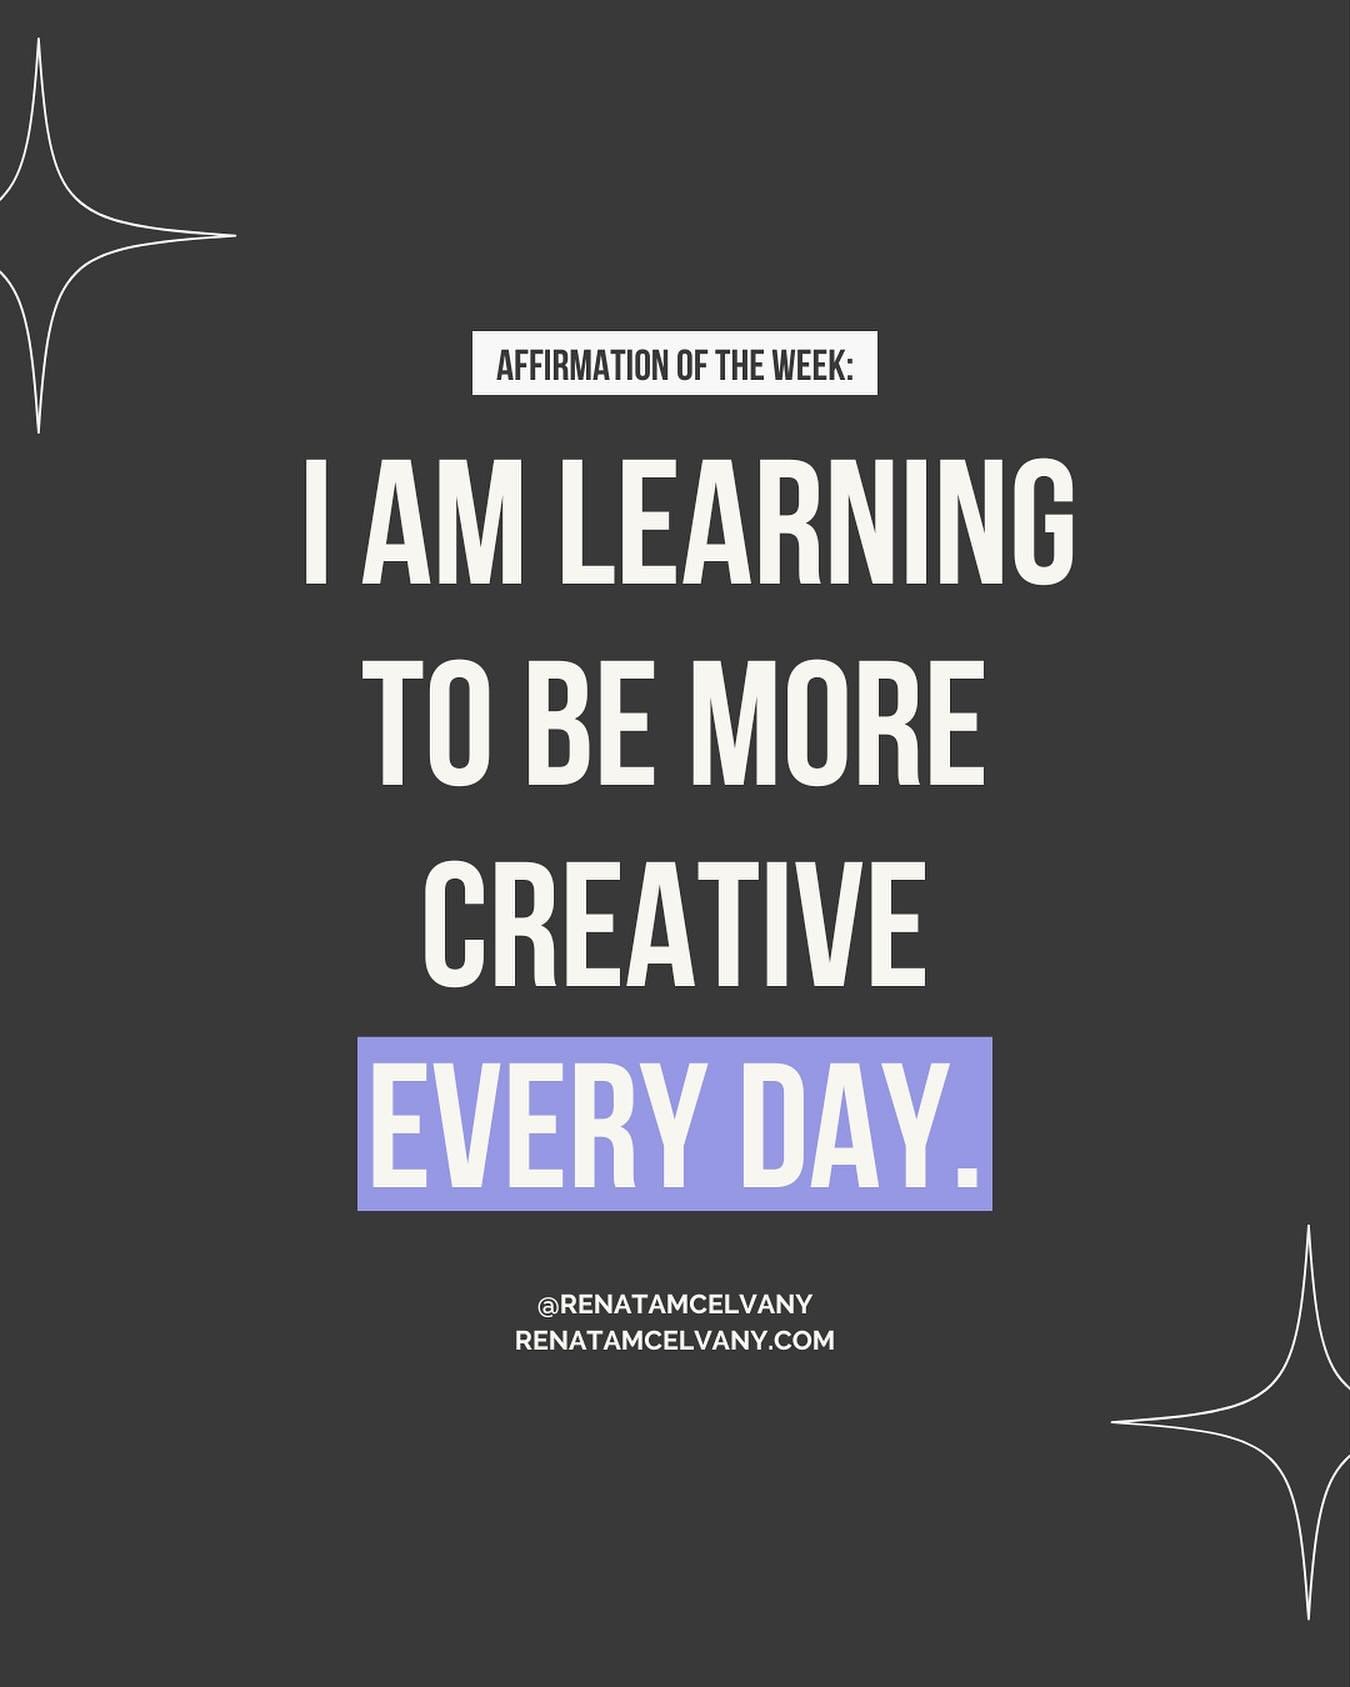 Creative souls! Here is your weekly affirmation:

I am learning to be more creative every day!✨

Wishing you a week filled with creative energy! 💜

#creativitycoach #creativementor&nbsp; #artistssupport #woccreatives #createthelifeyouwant #arttips #